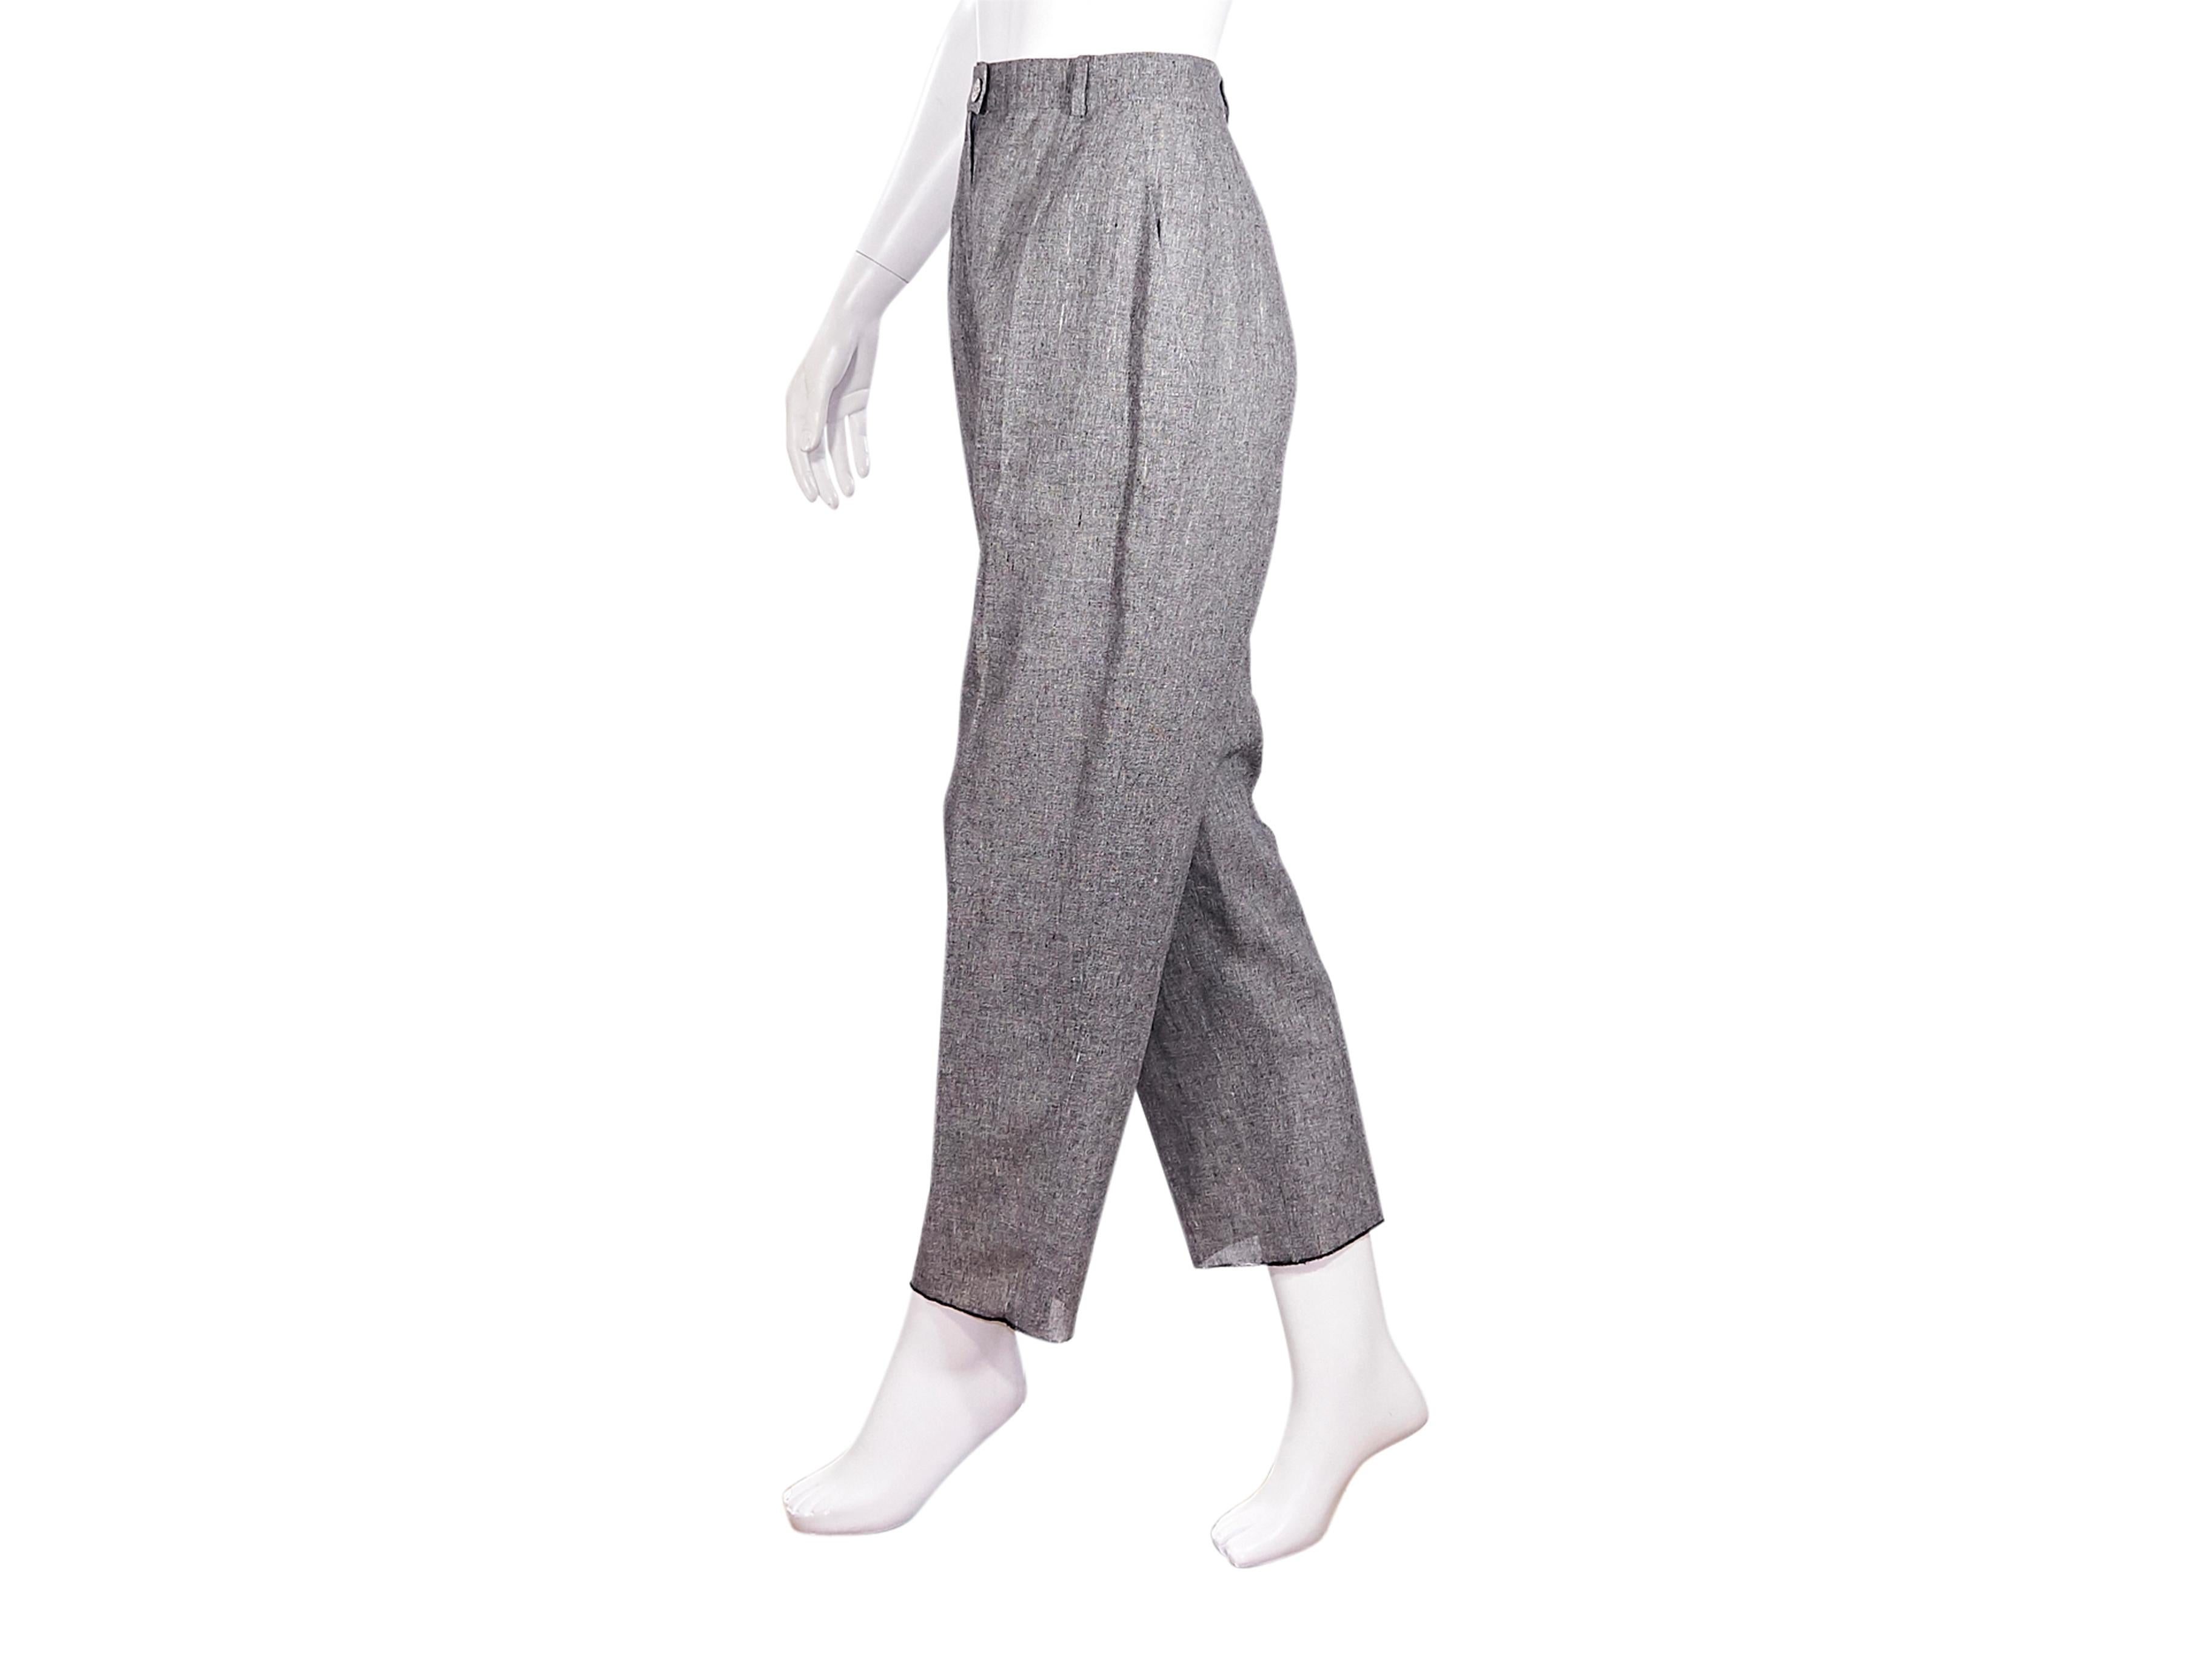 Product details:  Vintage grey linen straight-leg pants by Chanel Boutique. Circa 1998.  High-waist. Looped waist. Button and concealed zip front closure. Dual slit pockets at side. Cropped hems. Pair with black leather kitten heel ankle boots.